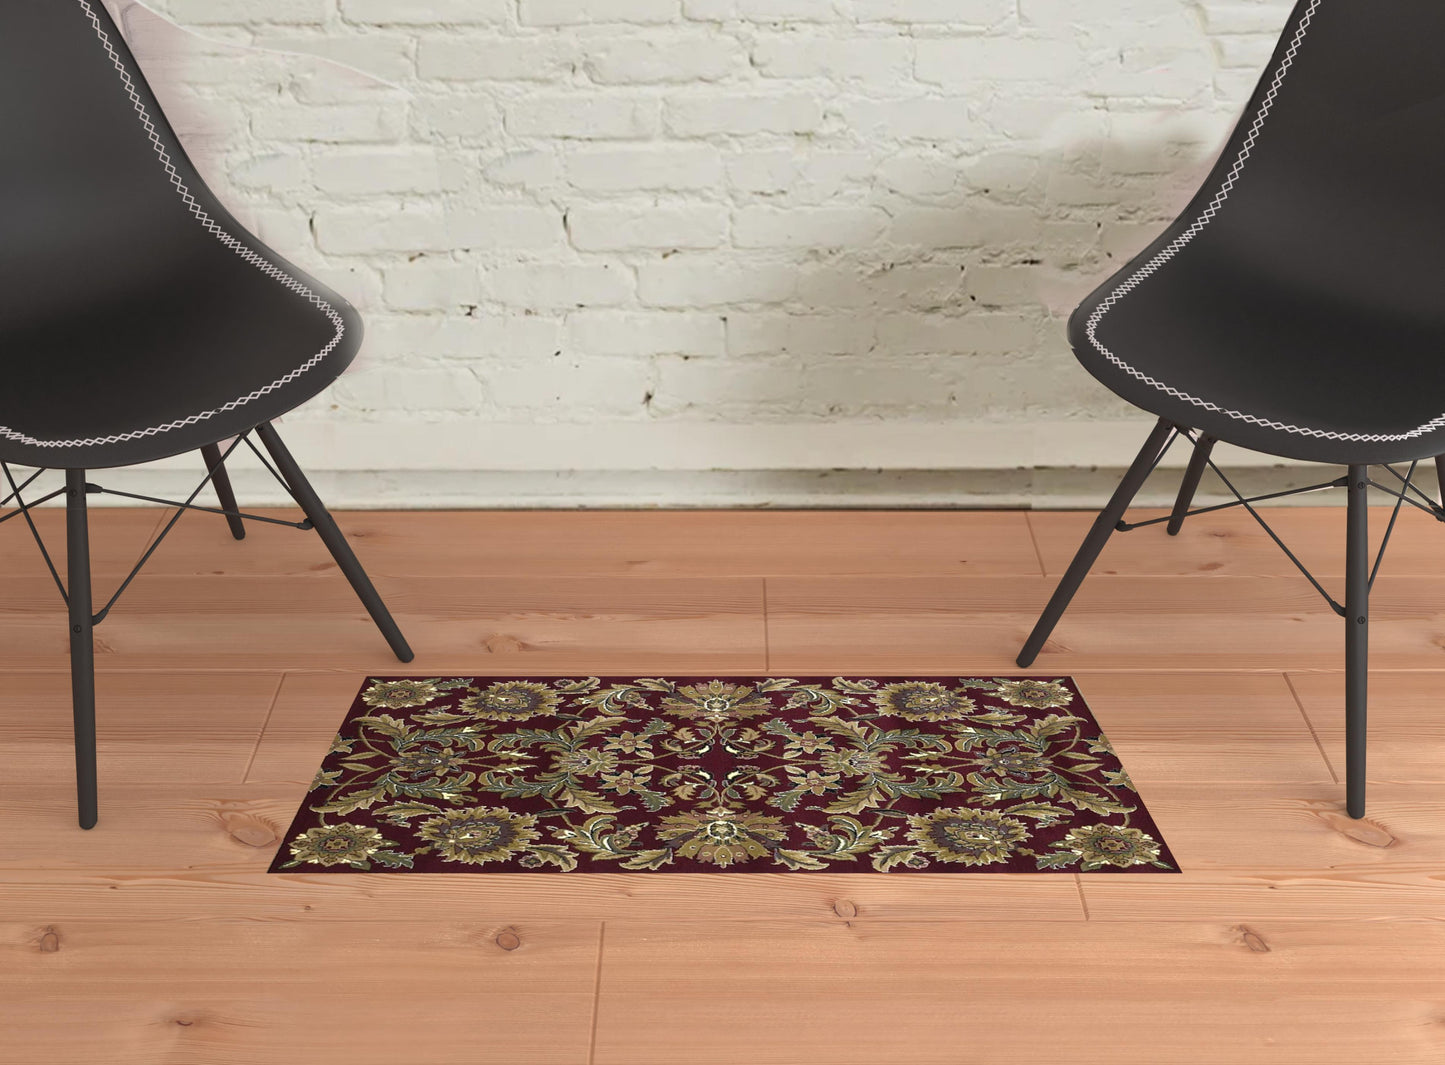 Red And Black Octagon Floral Vines Area Rug